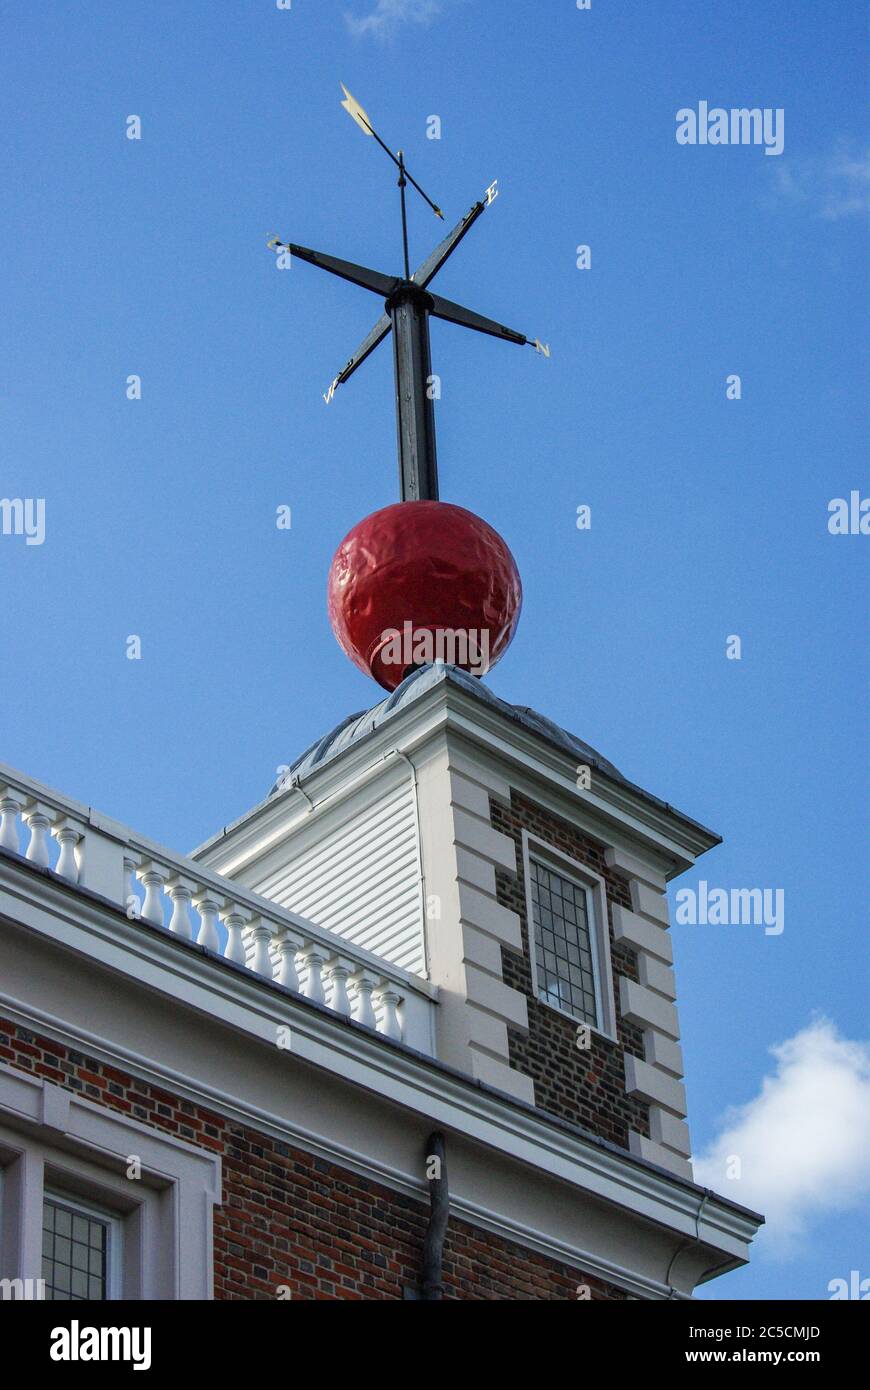 Flamsteed House, Royal Observatory, Greenwich, London; with the red Time Ball on the roof. Stock Photo